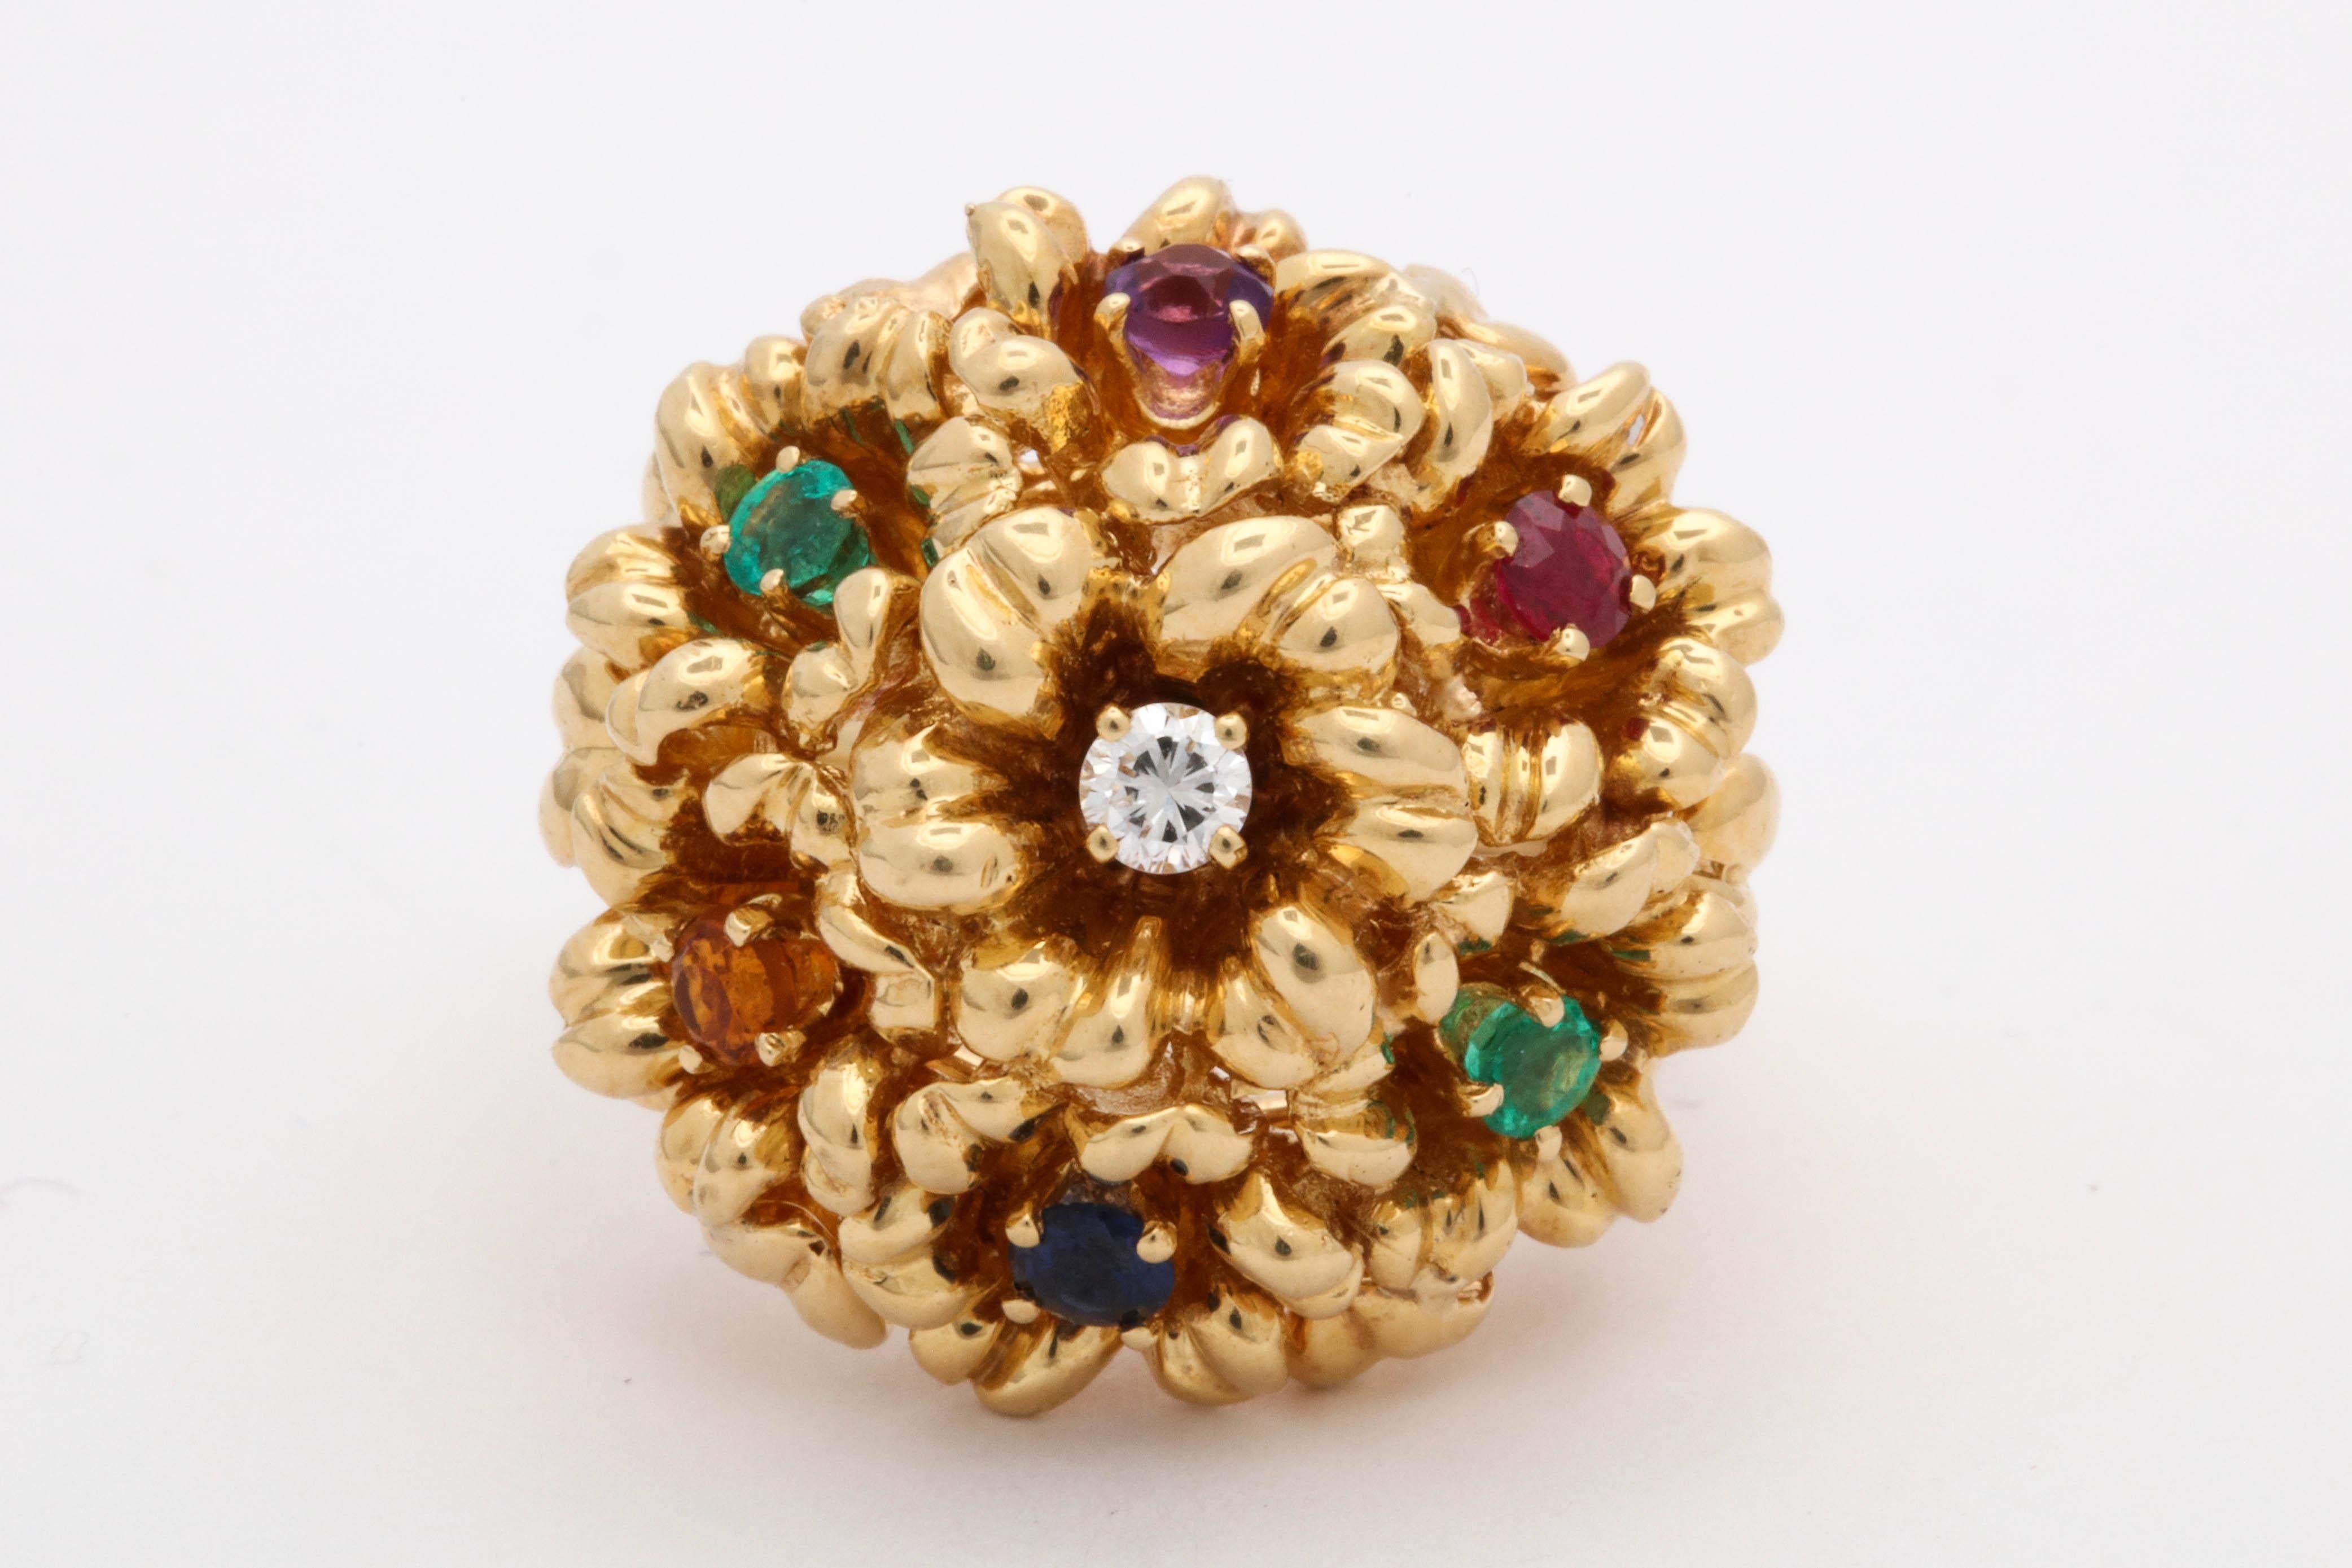 One Ladies 18kt Yellow Gold Cocktail Ring Designed In A Floral Basket Motif And Embellished With [7] Gemstones Spelling The Word 